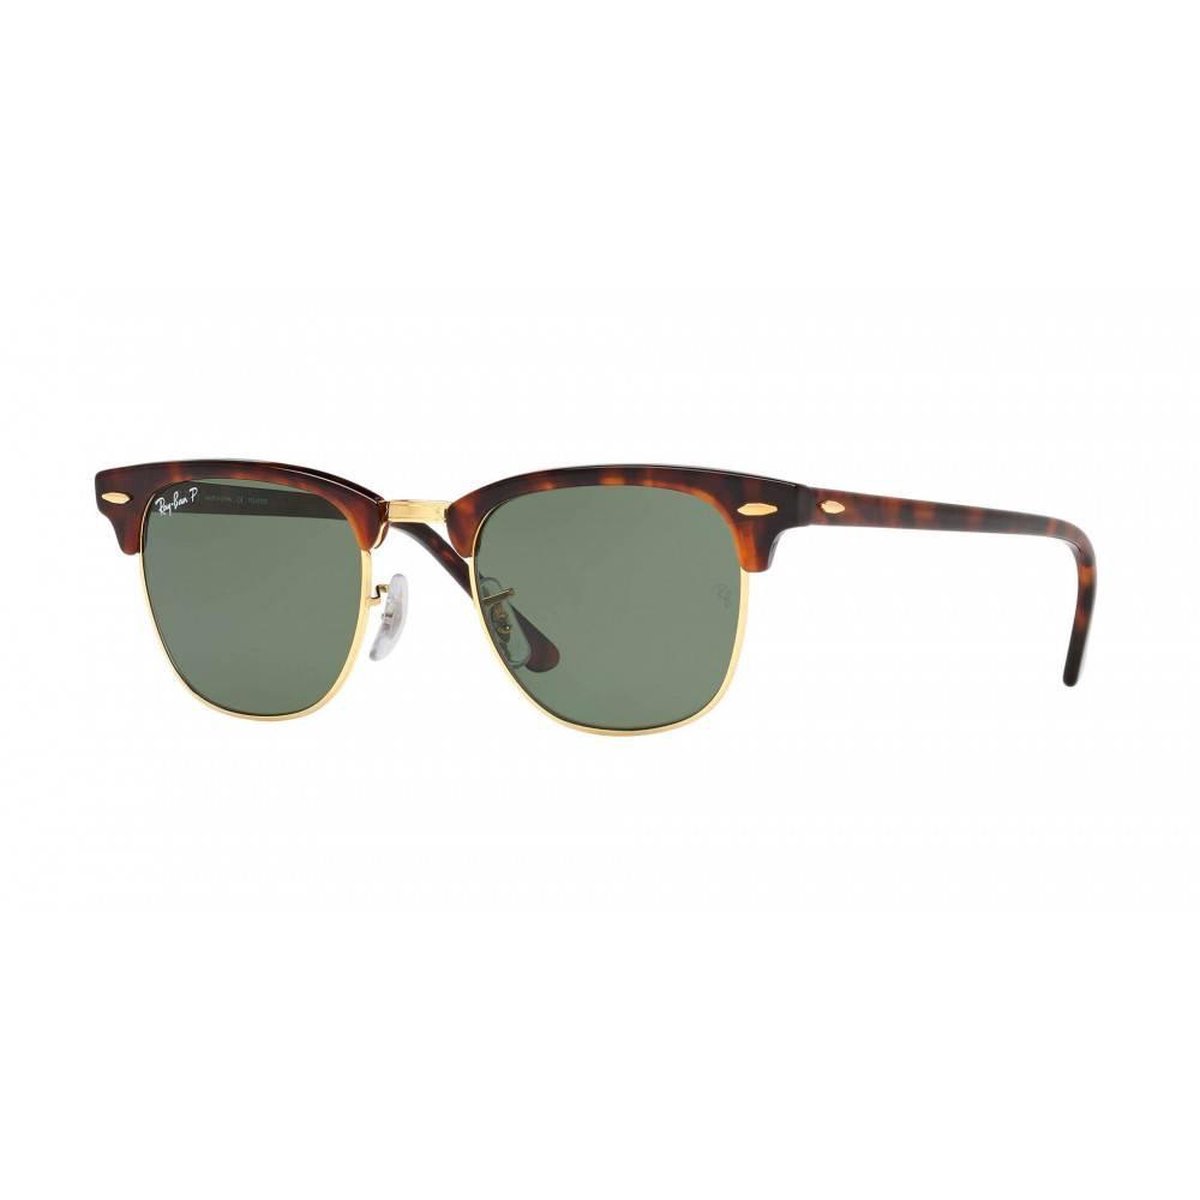 Ray-Ban Clubmaster RB3016 51mm